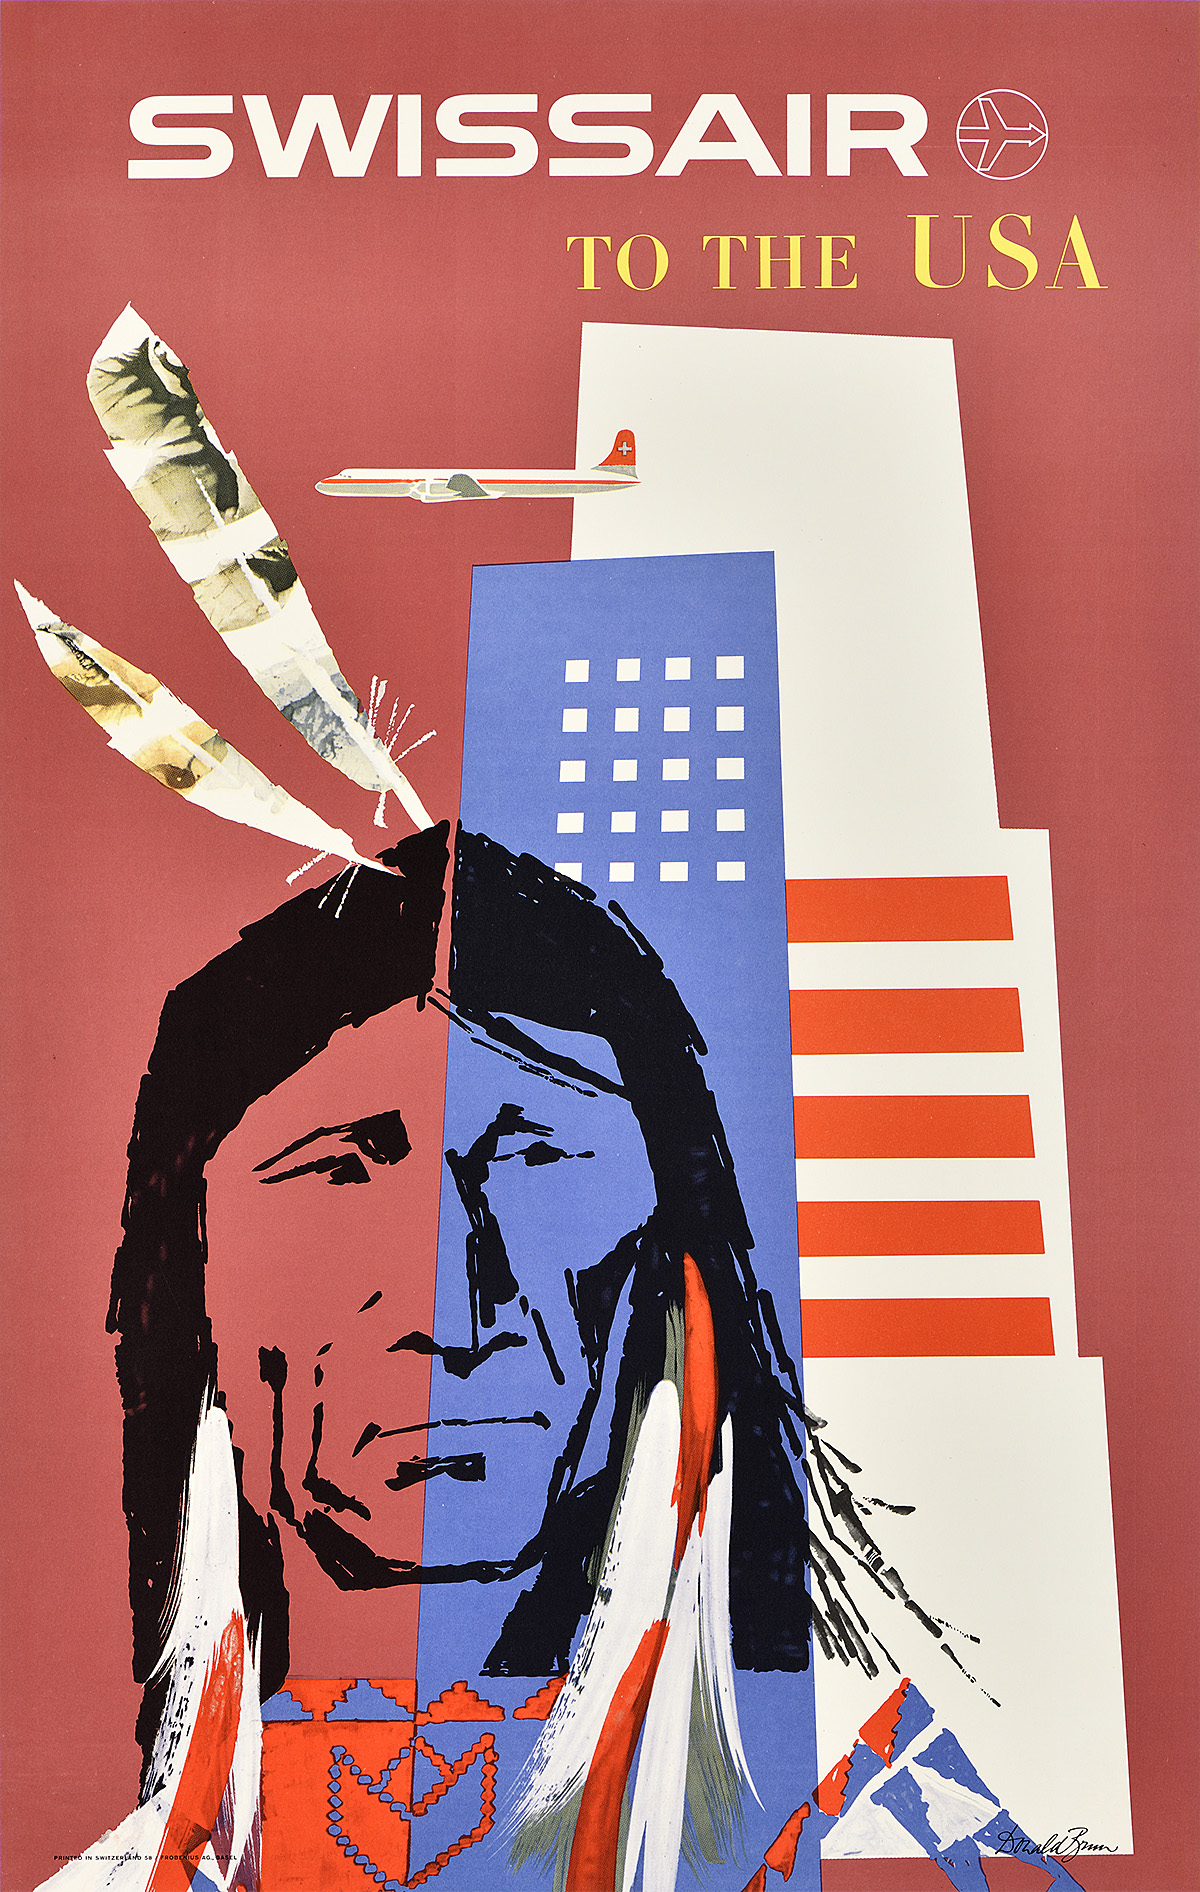 A poster of a stereotypical Native American man on top of a building made out of the American flag.